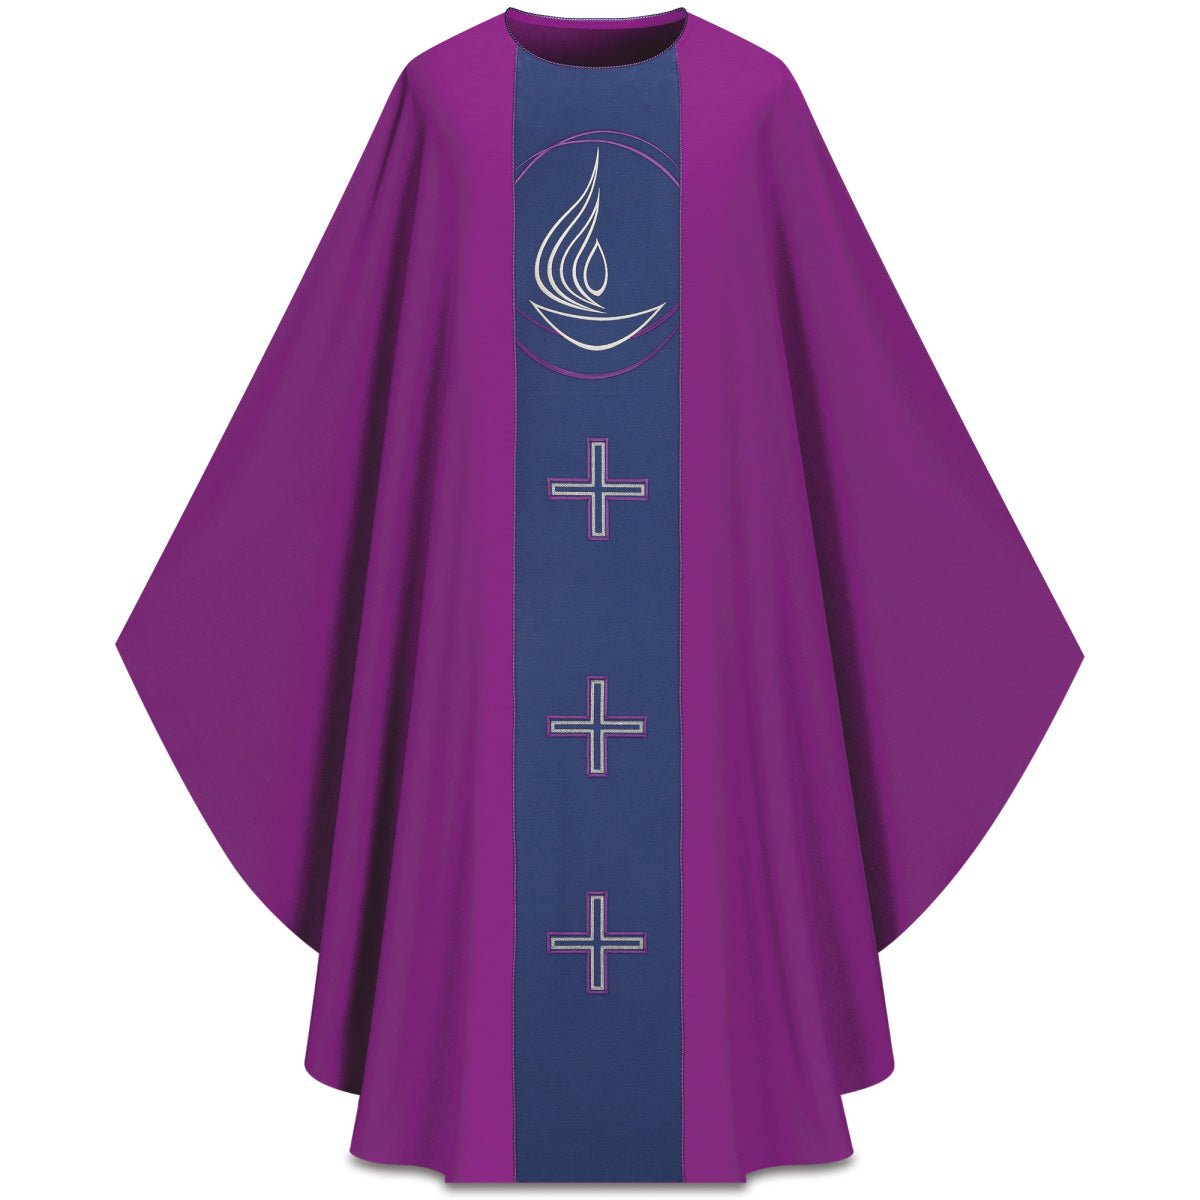 Lenten Chasuble with Incense Motif